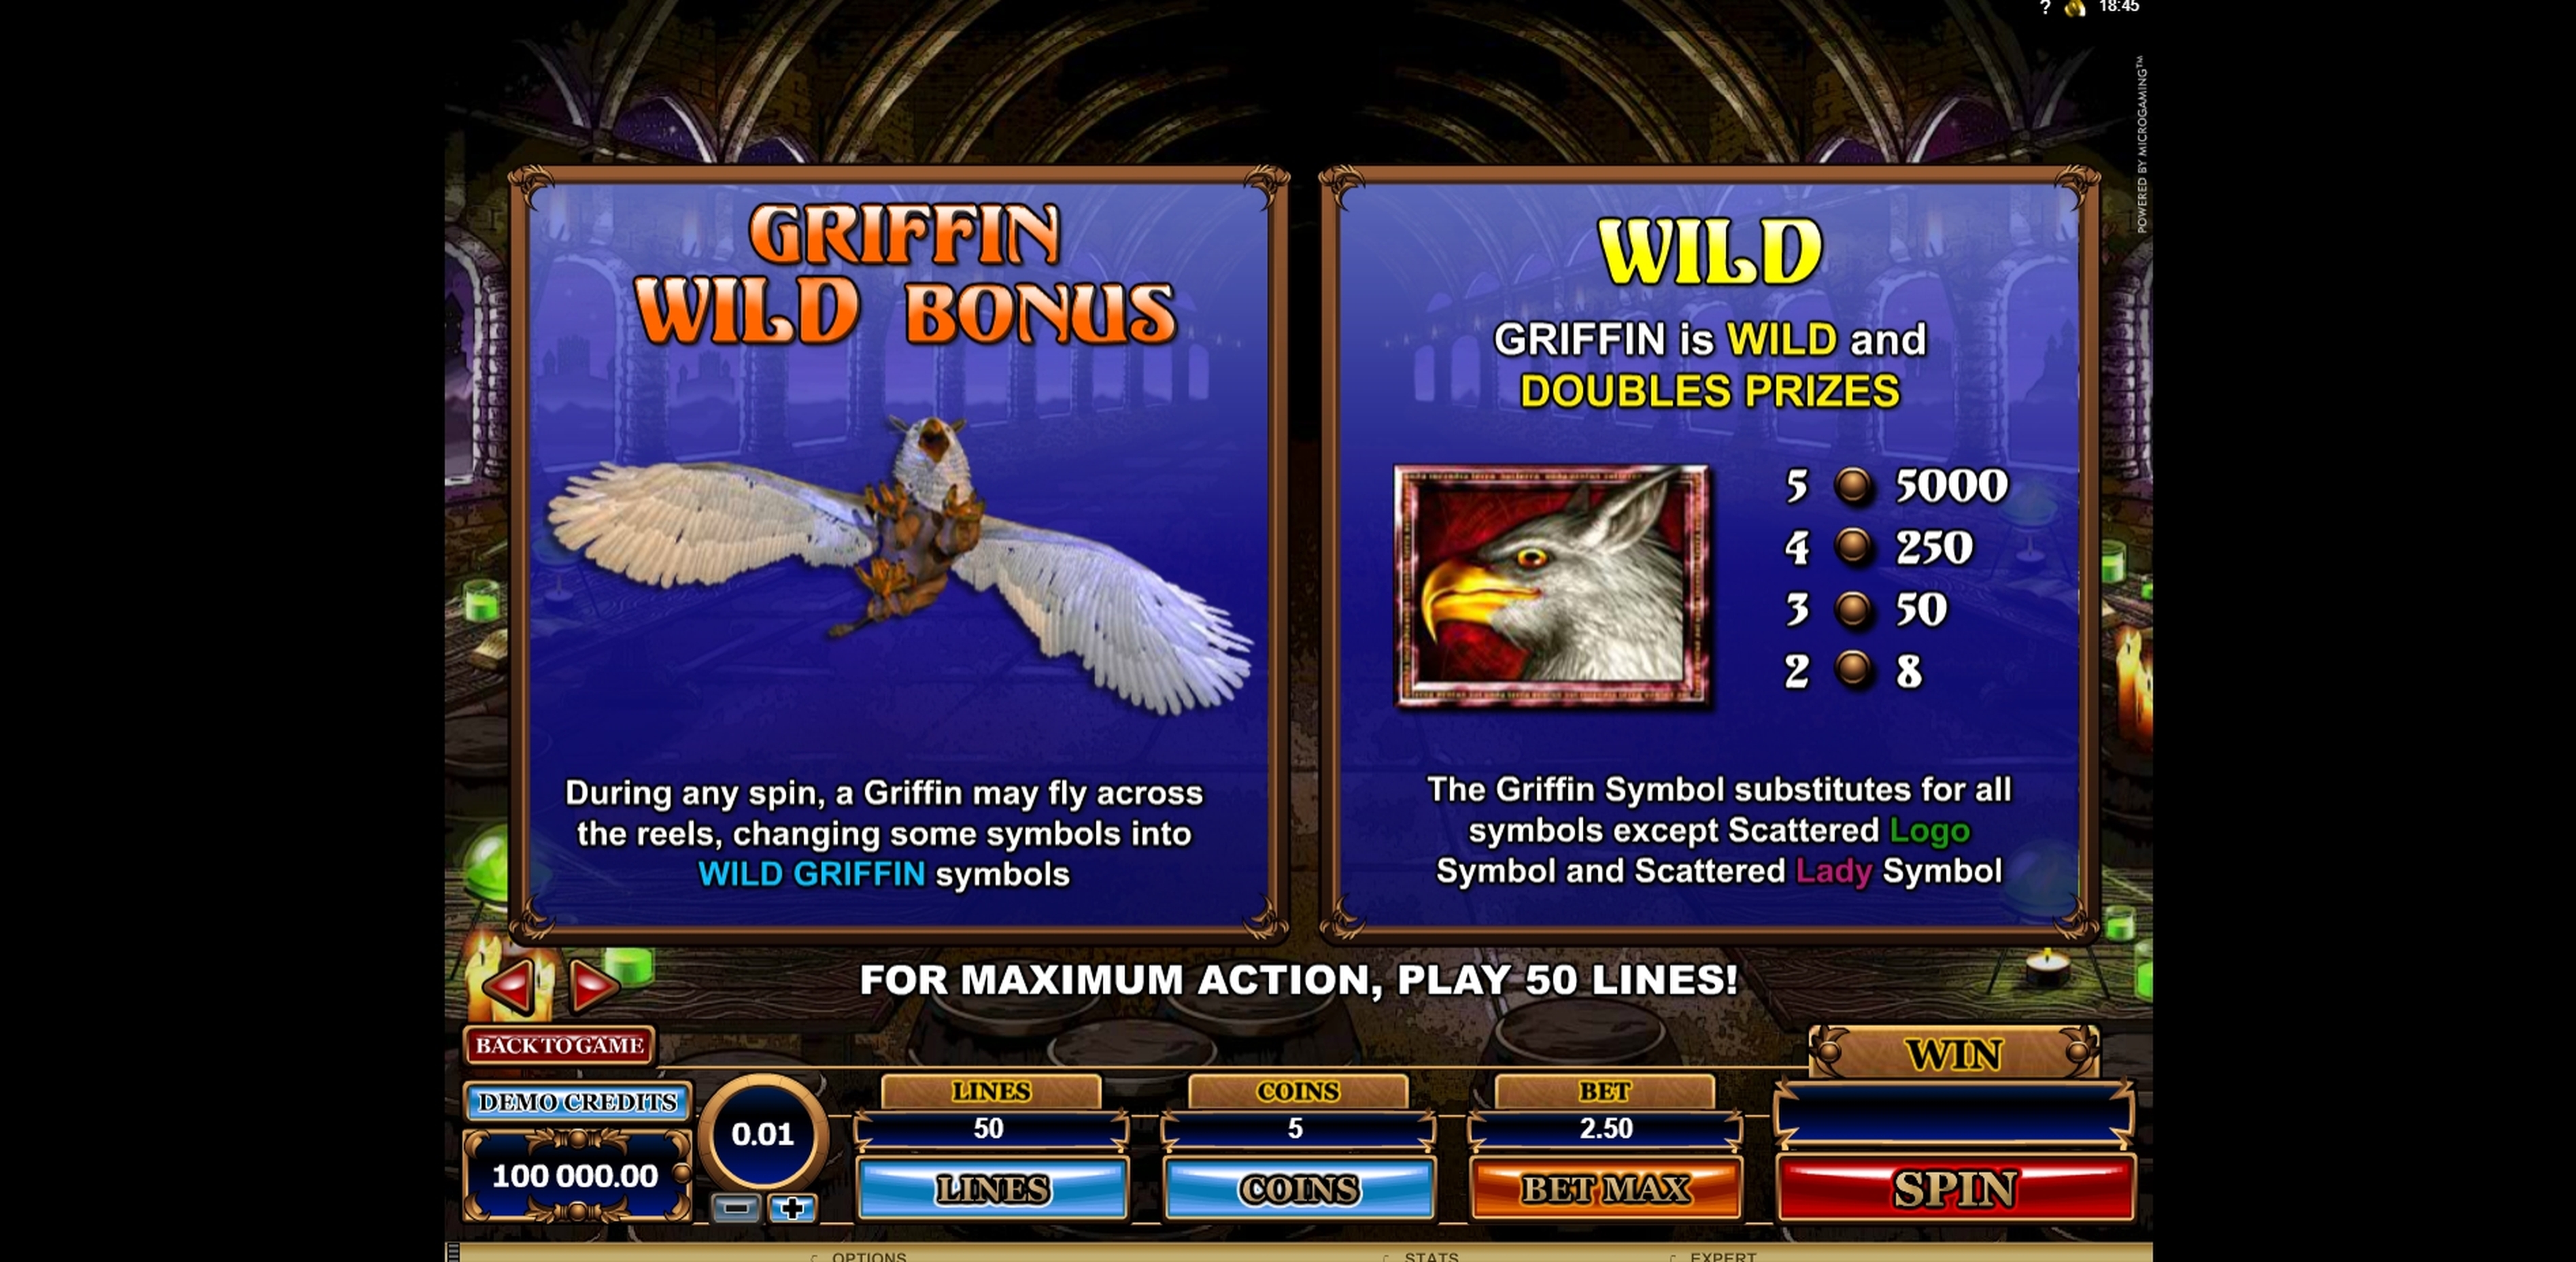 Info of Great Griffin Slot Game by Microgaming